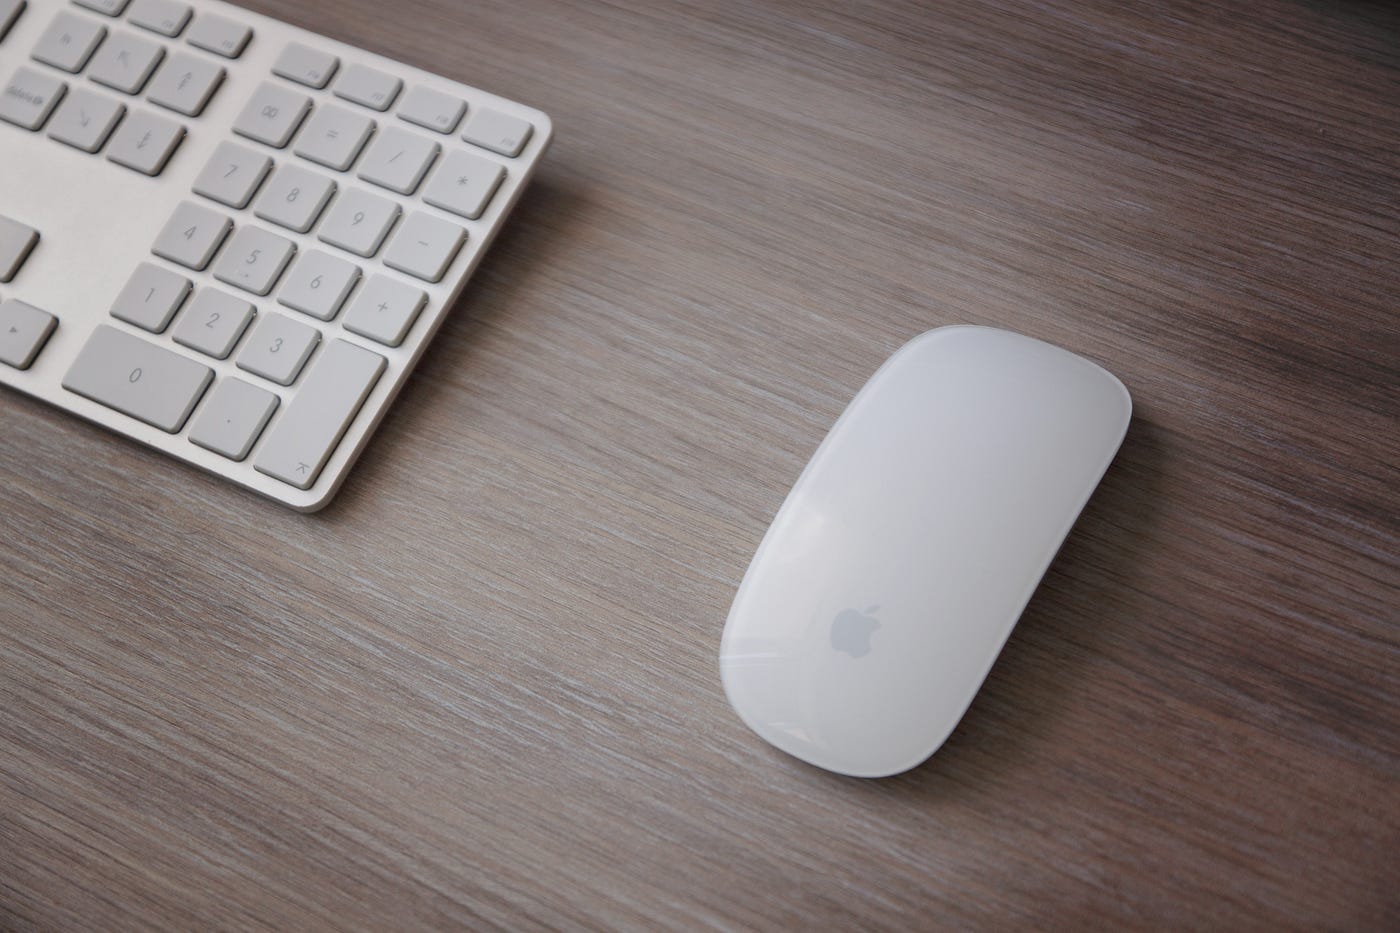 I can't give up the Apple Magic Mouse: I simply love it | by Ivano Di Gese  | Medium